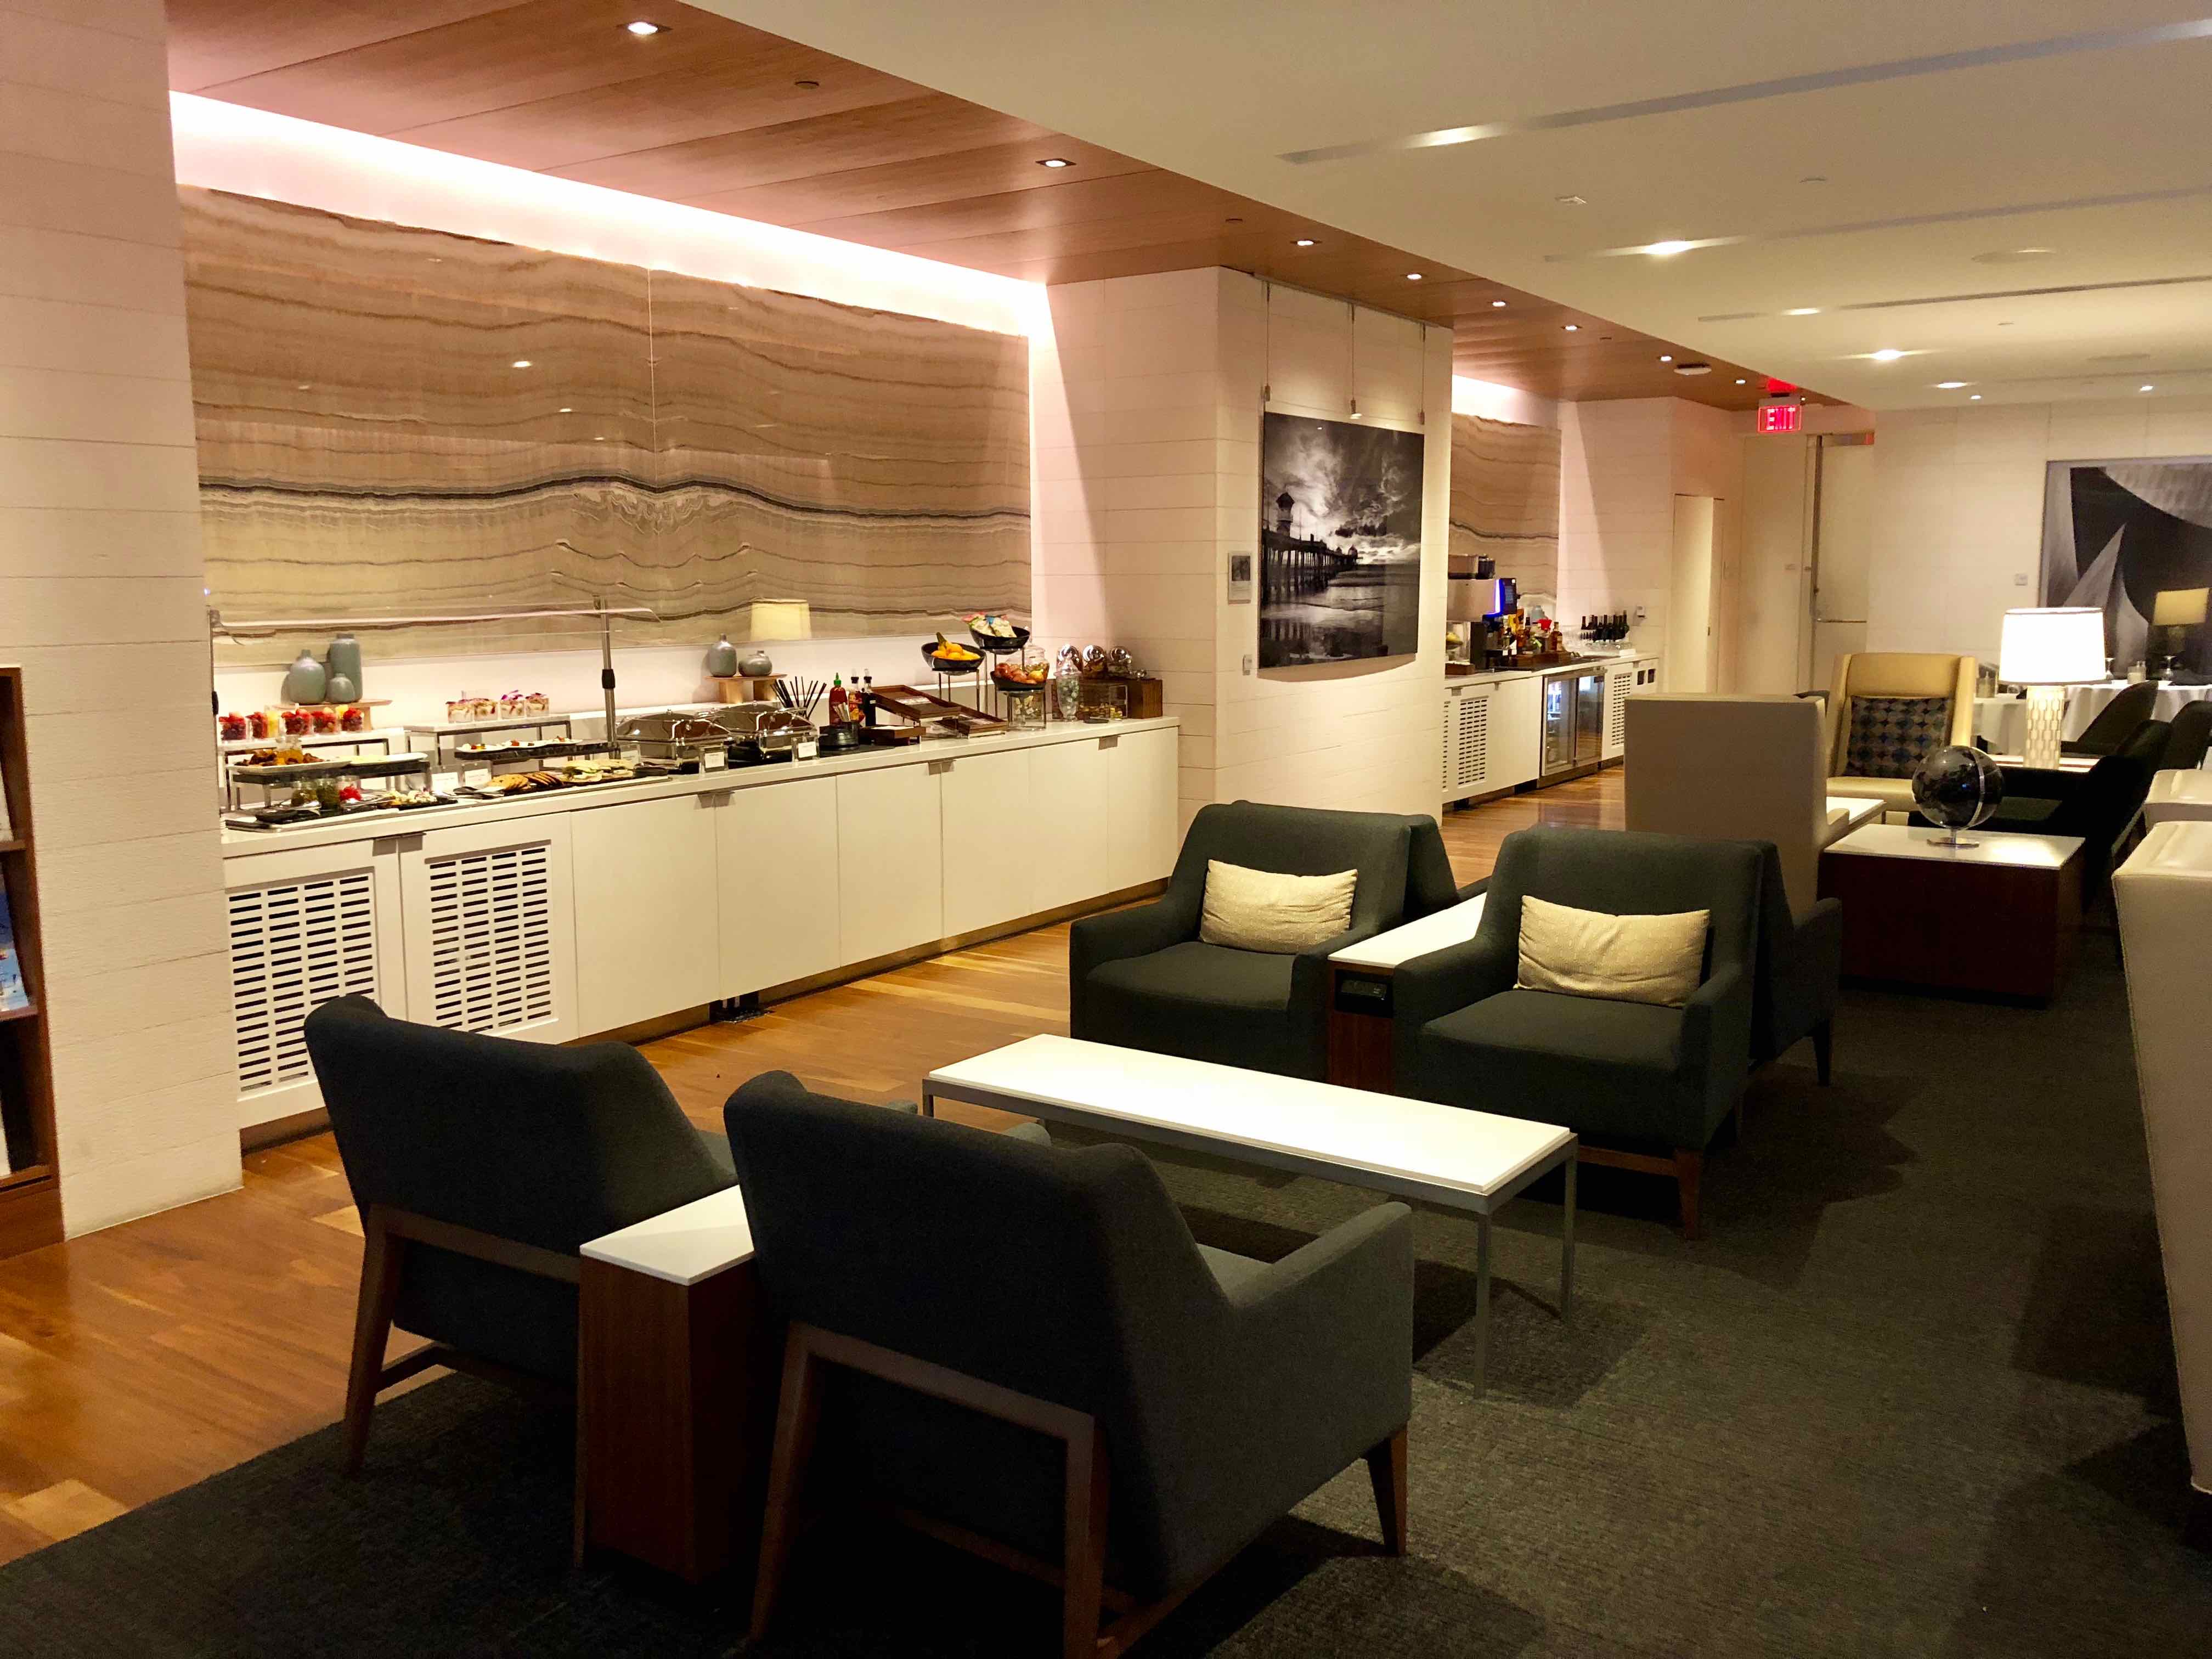 Star Alliance First Class LAX Lounge seating area